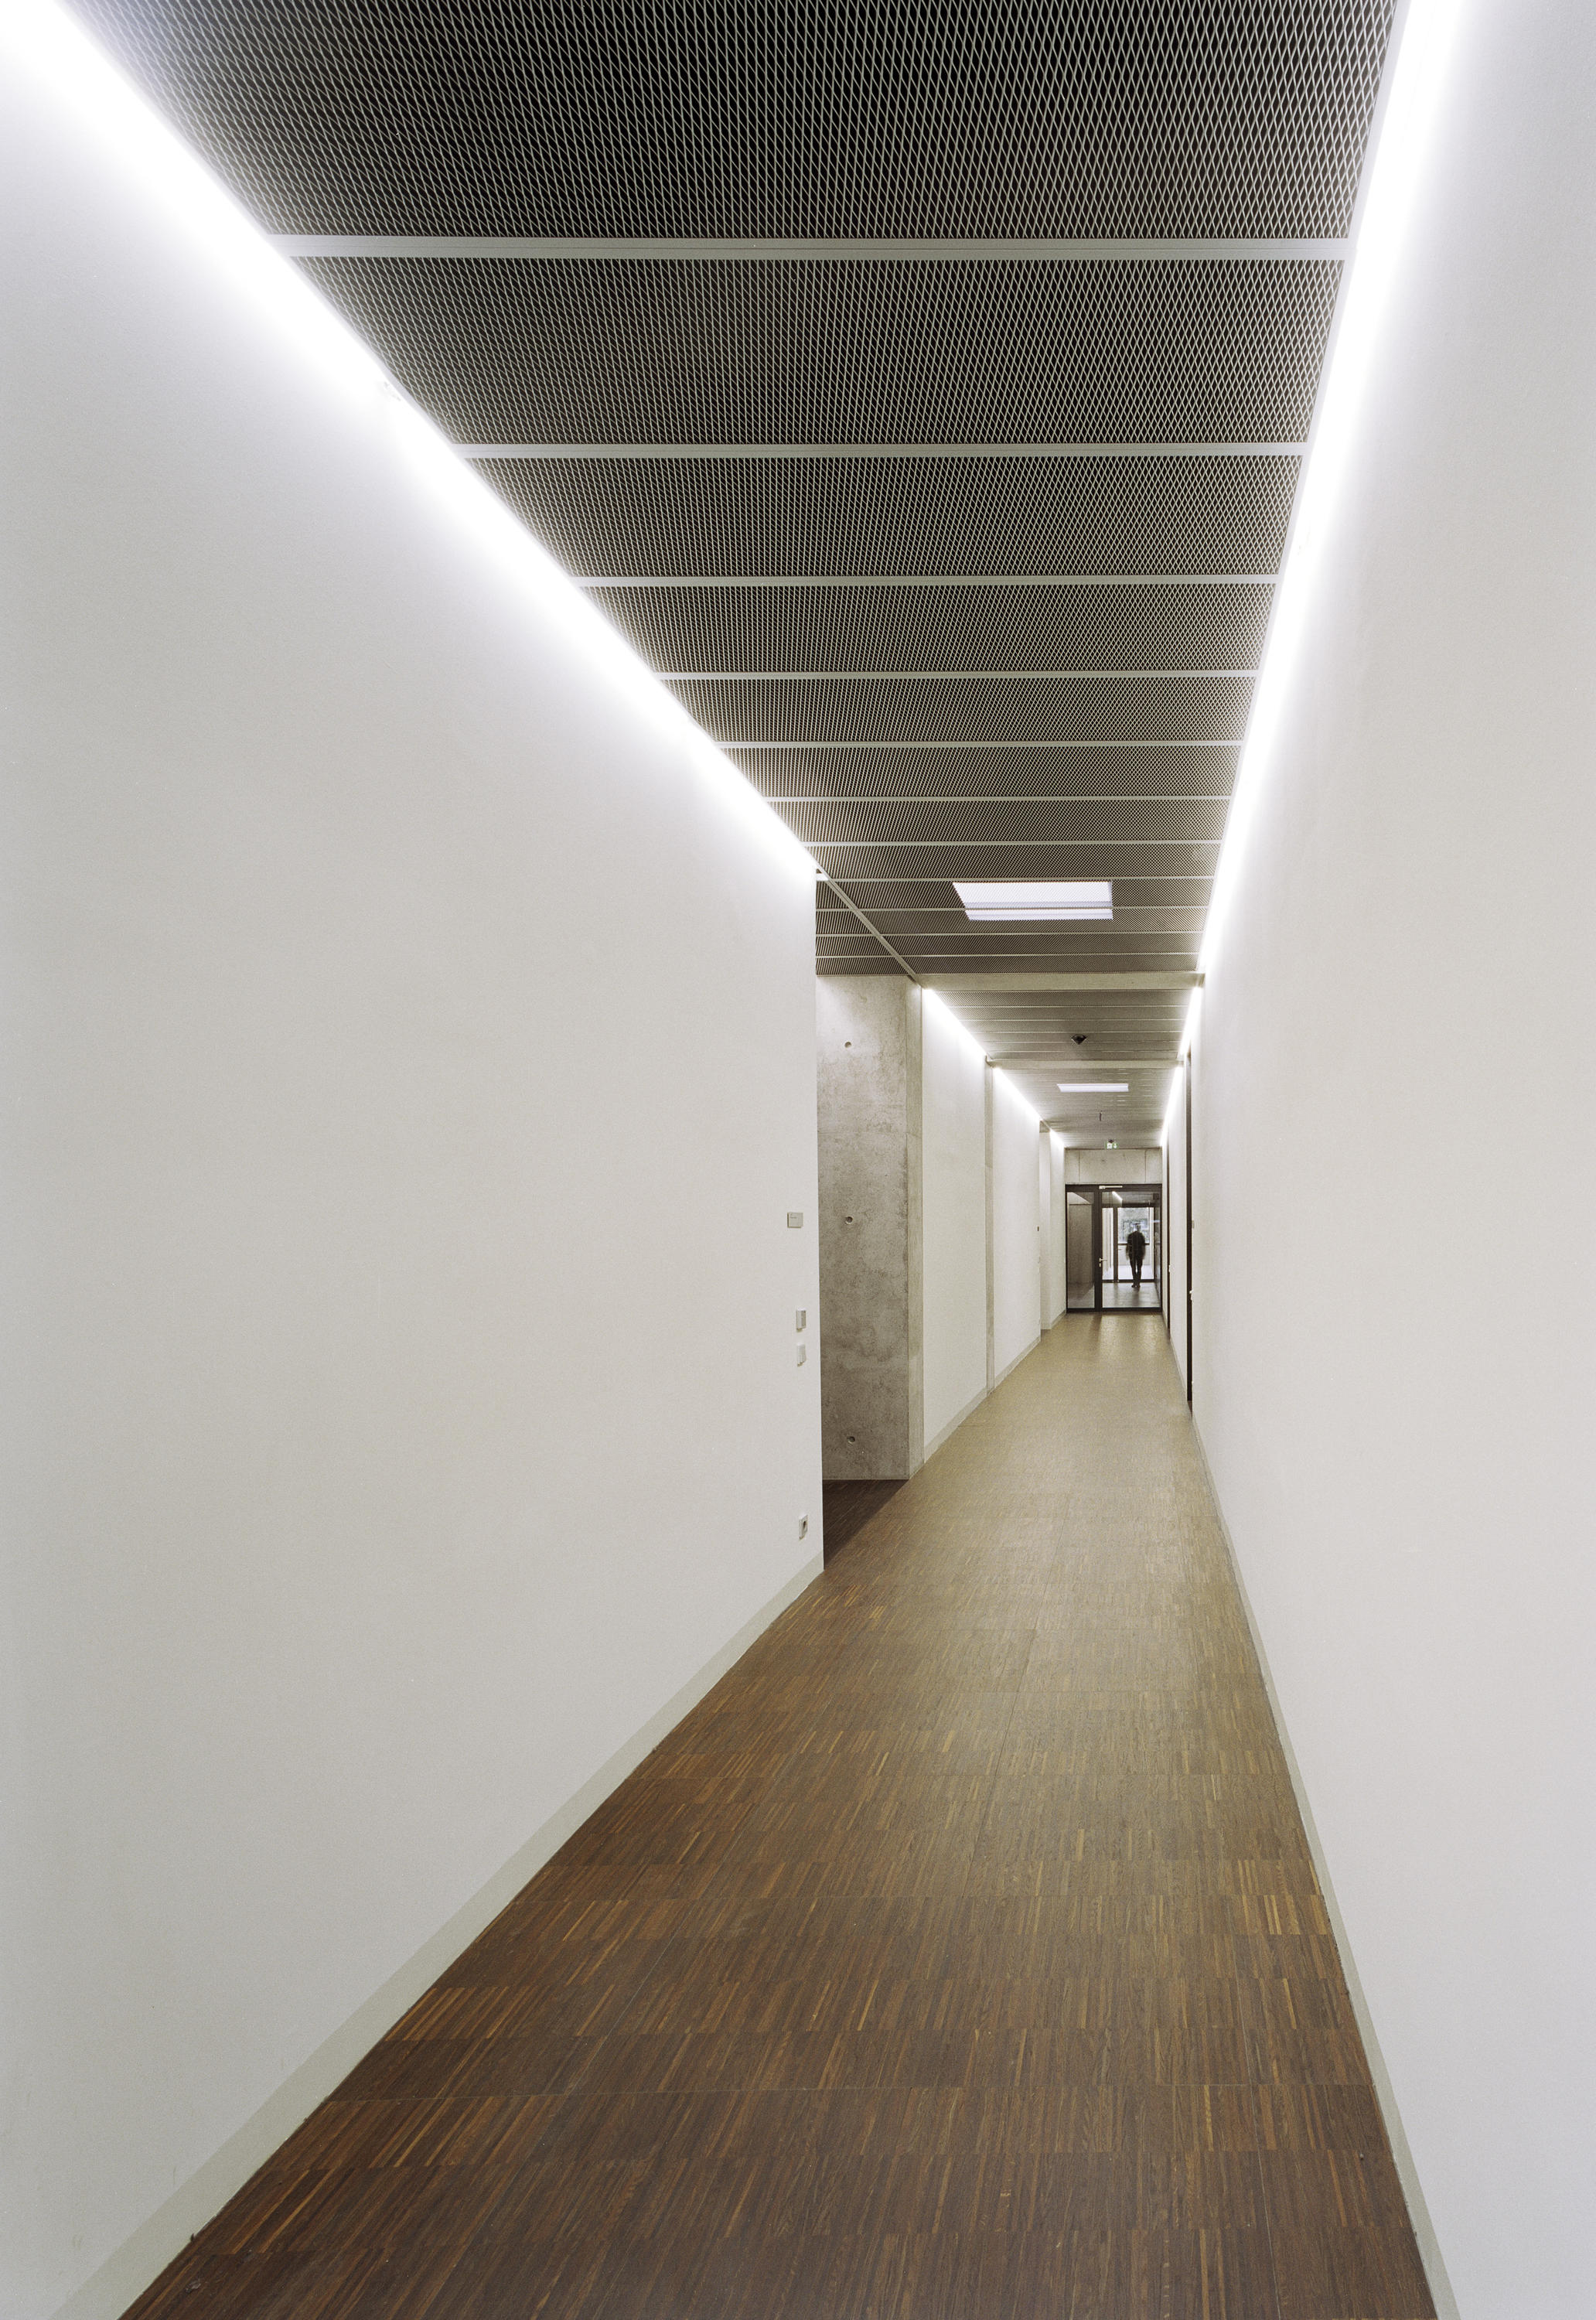  EXPANDED METAL CEILINGS  Ceiling  systems from Lindner 